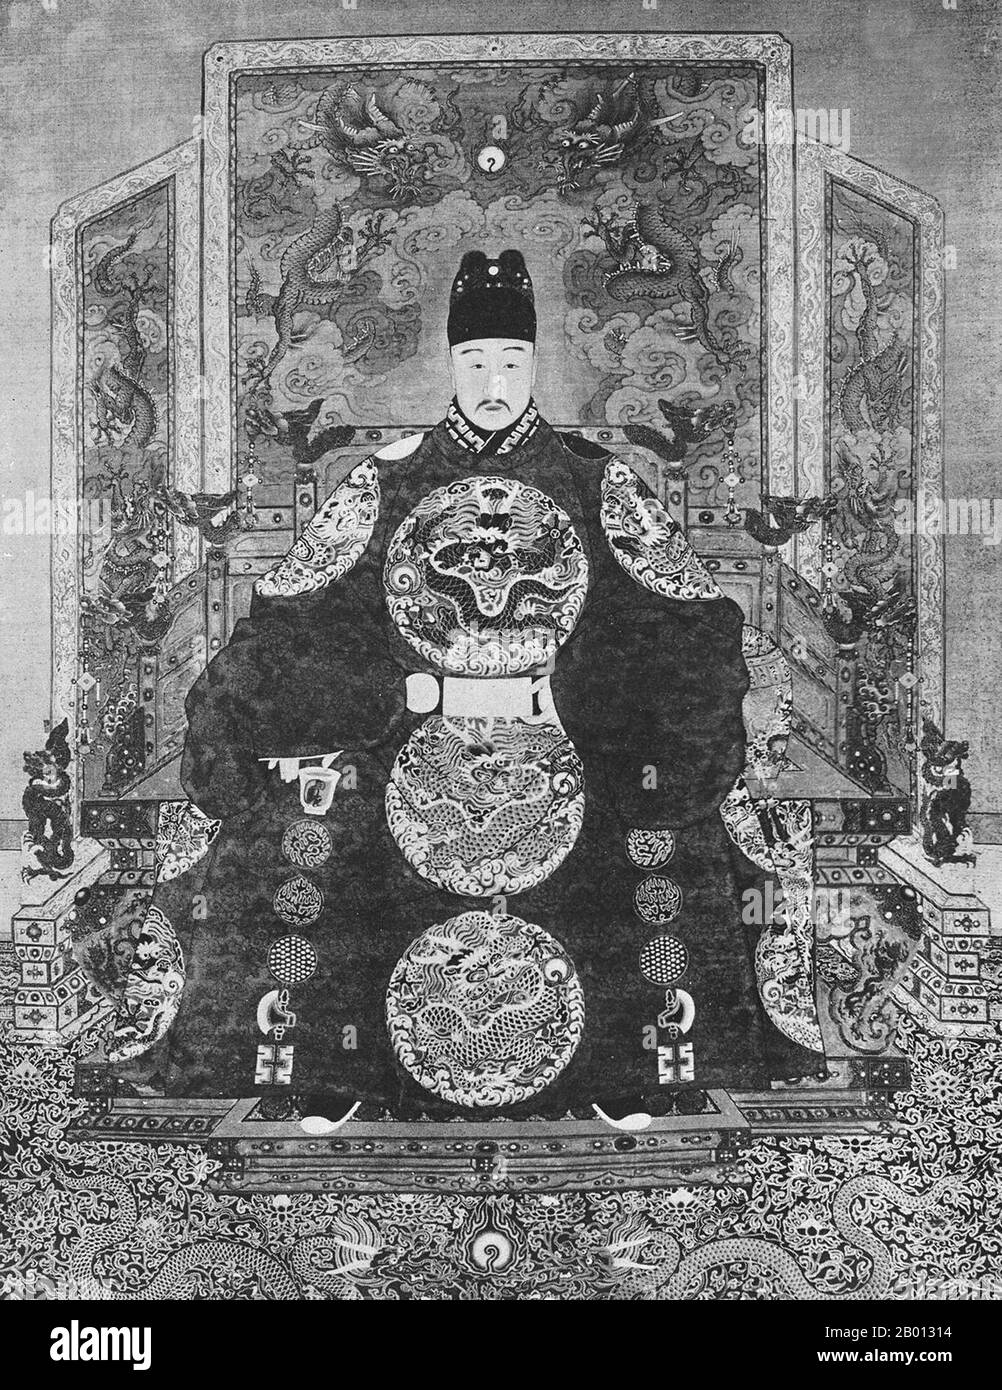 China: Emperor Longqing (4 March 1537 - 5 July 1572), 13th ruler of the Ming Dynasty (r. 1567-1572). Hanging scroll painting, 16th-17th century.  The Longqing Emperor (1537-1572), personal name Zhu Zaihou and temple name Muzong, was the 13th emperor of the Ming Dynasty. His era name means 'Great Celebration'. Emperor Longqing's reign lasted a mere six years and was succeeded by his son. It was said that Longqing also suffered from speech impairment which caused him to stutter and stammer when speaking in public. He is generally considered one of the more liberal and open-minded Ming emperors. Stock Photo